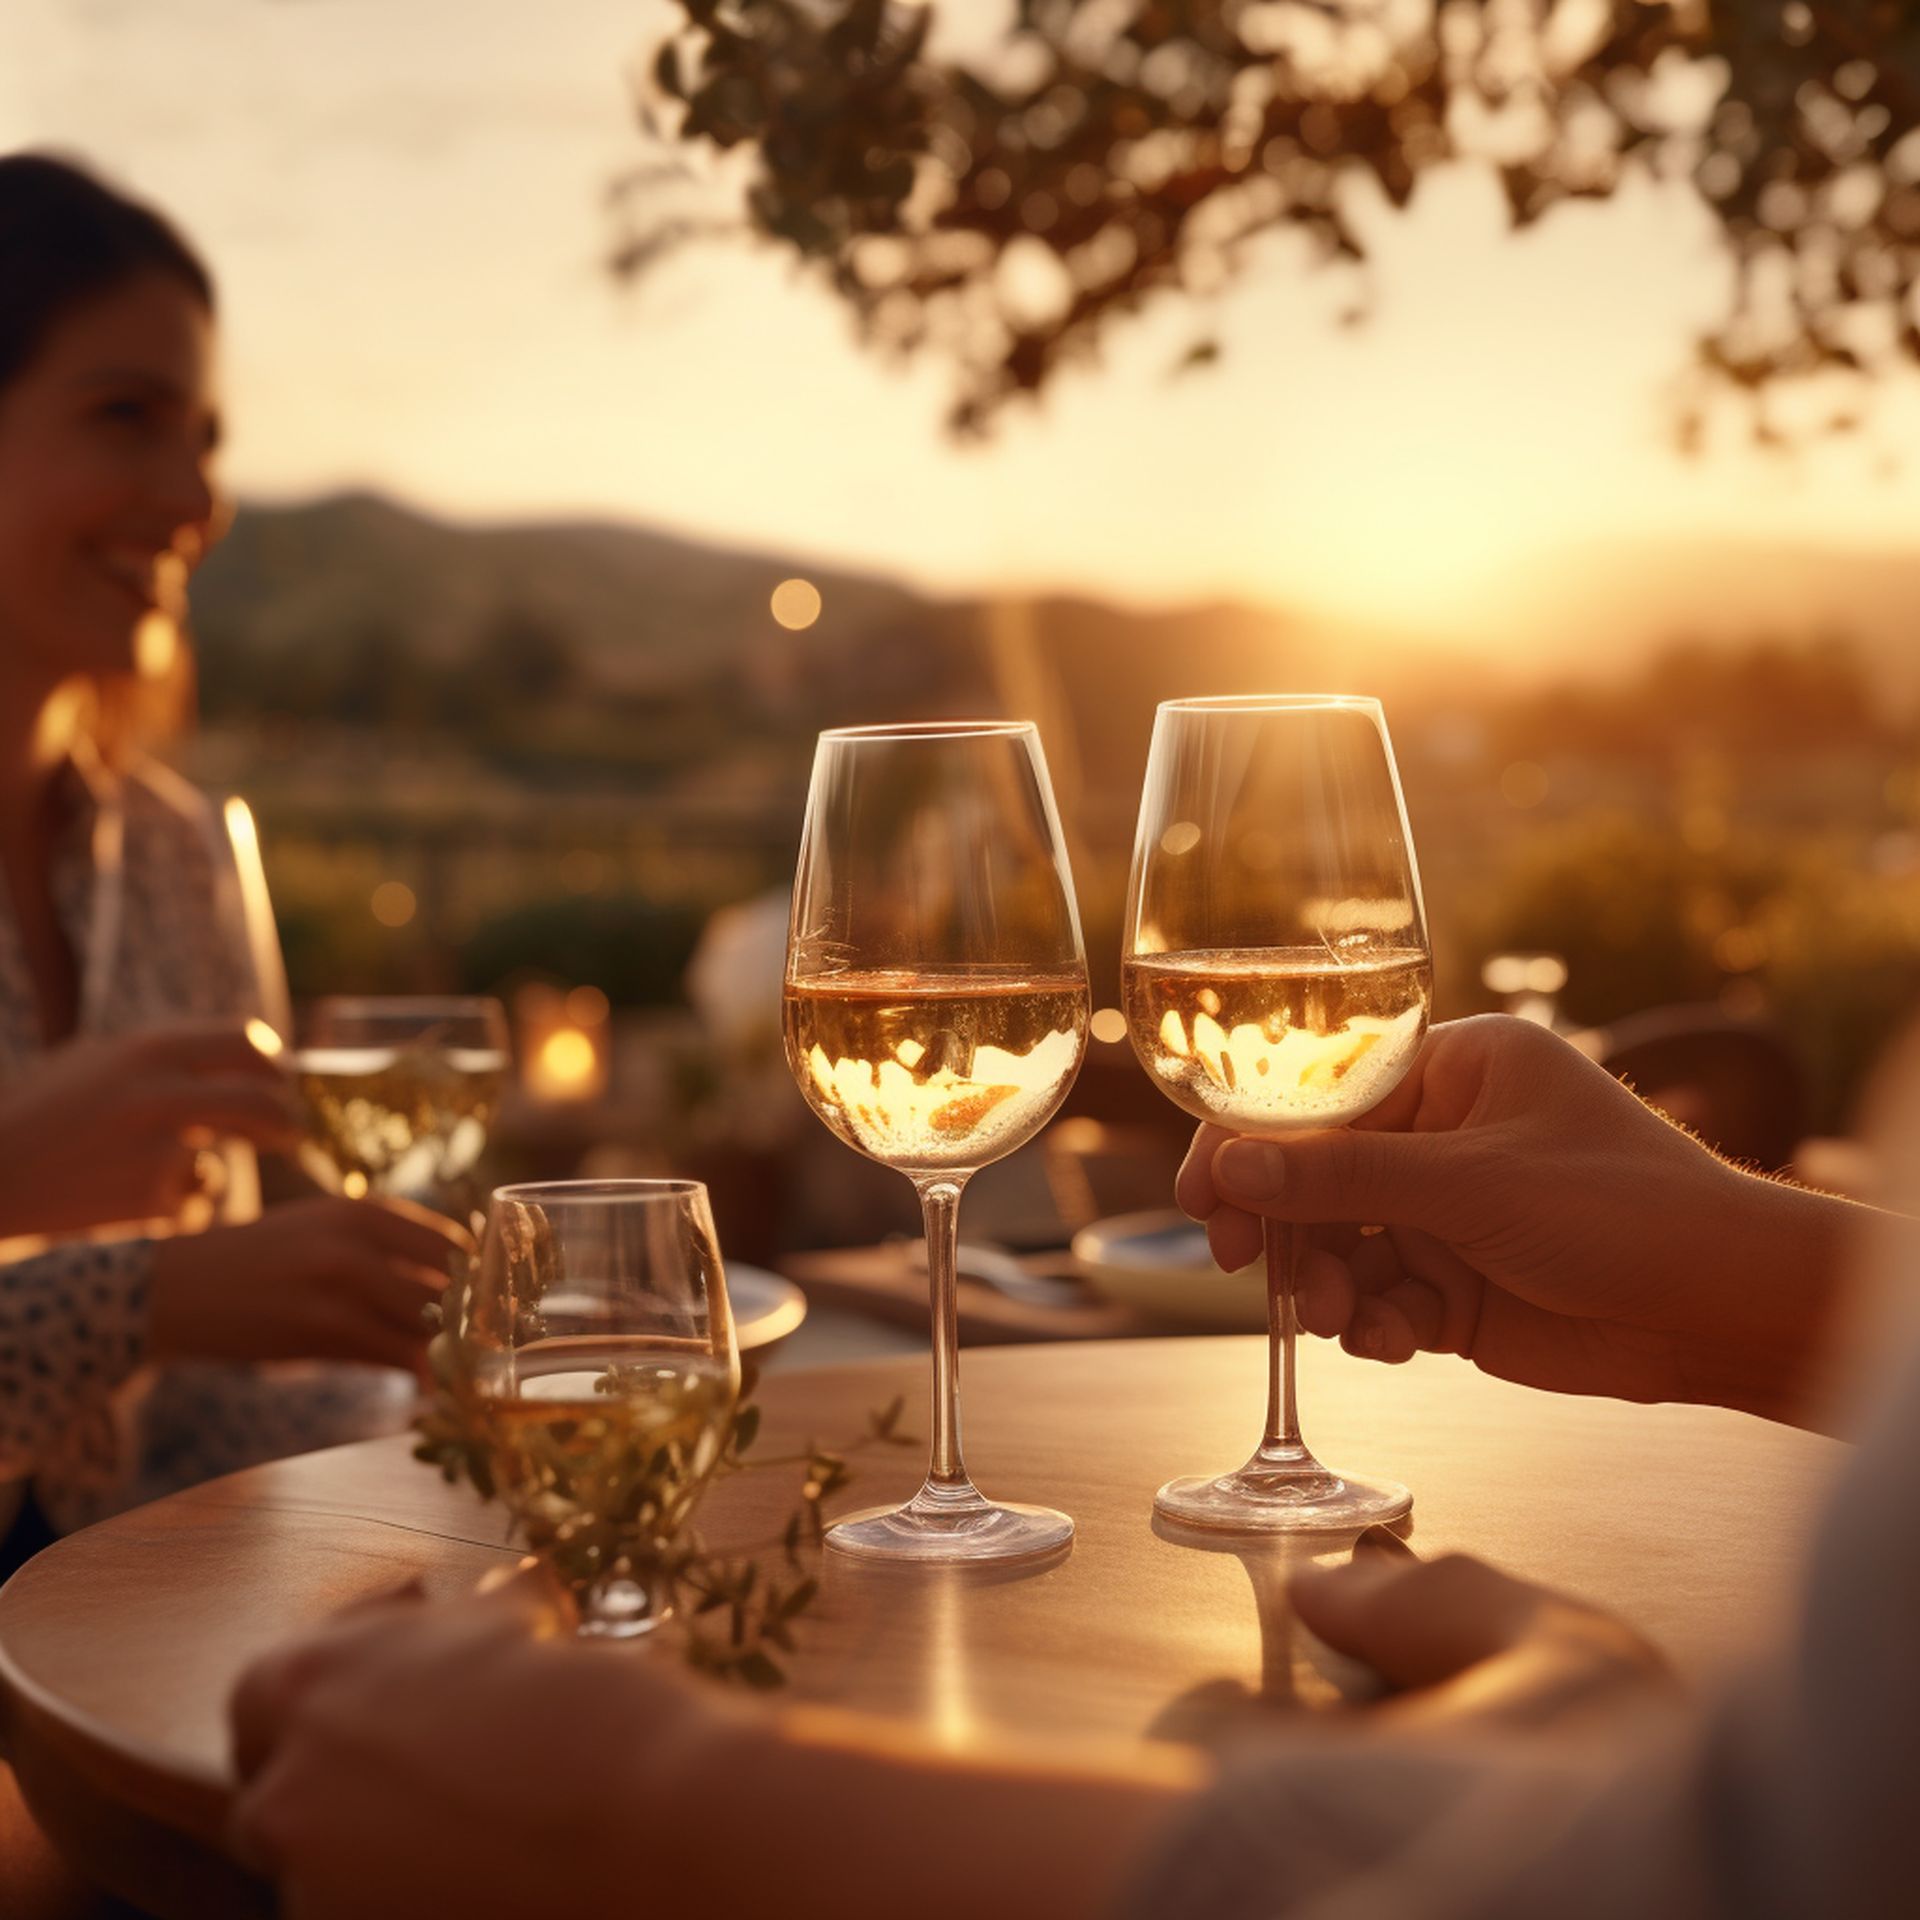 couples drinking Sauvignon Blanc wine in a restaurant in a romantic setting